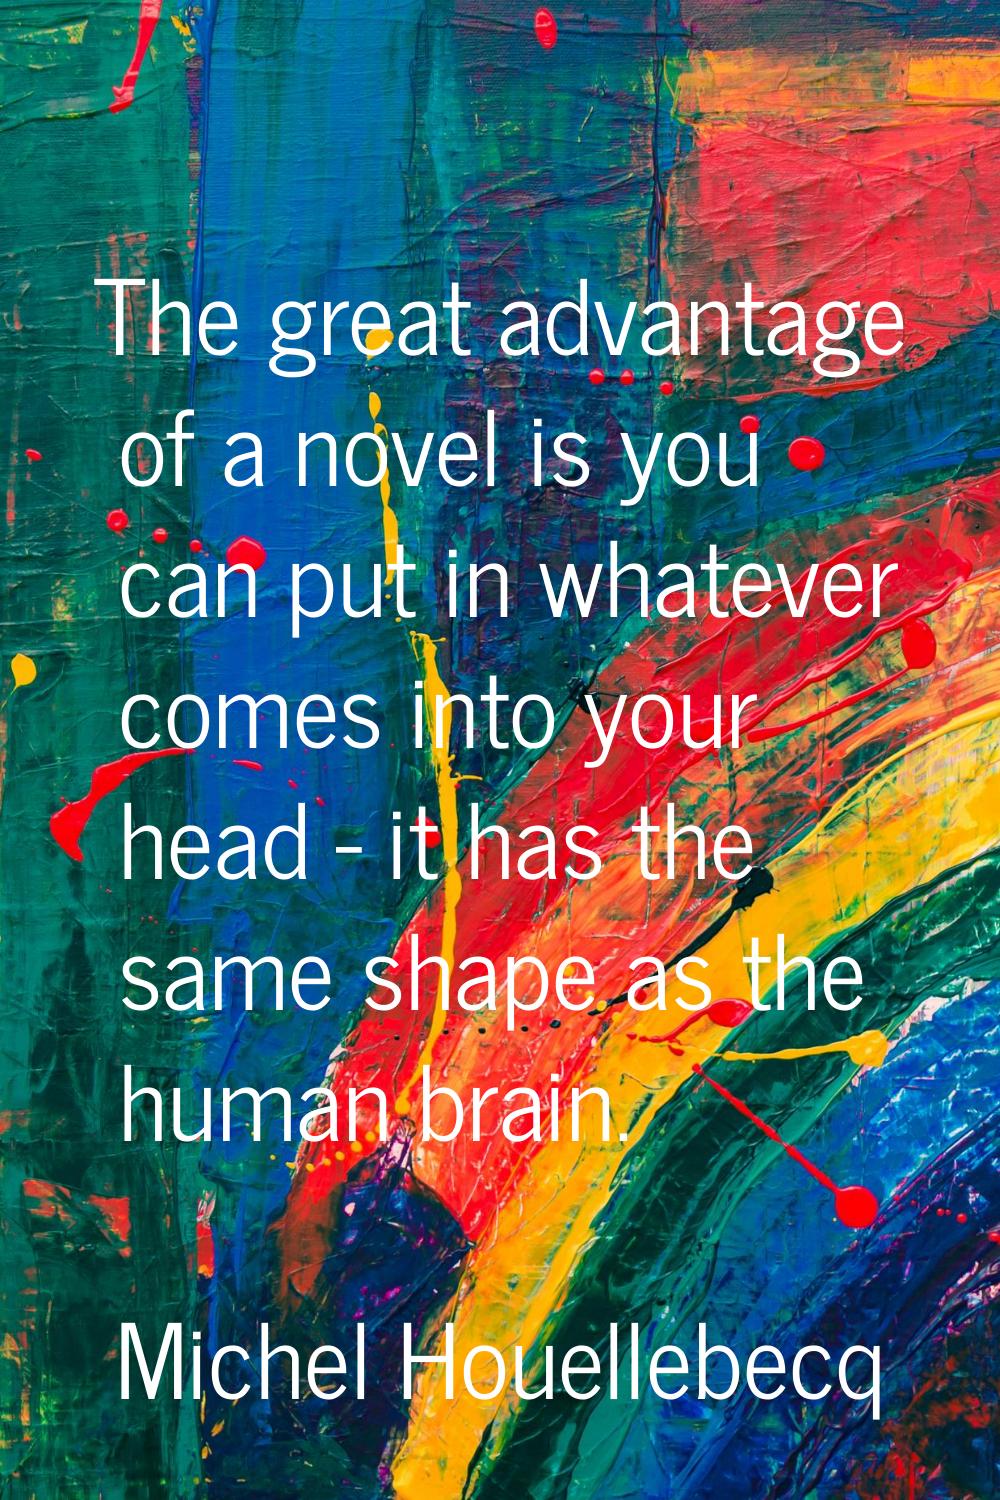 The great advantage of a novel is you can put in whatever comes into your head - it has the same sh